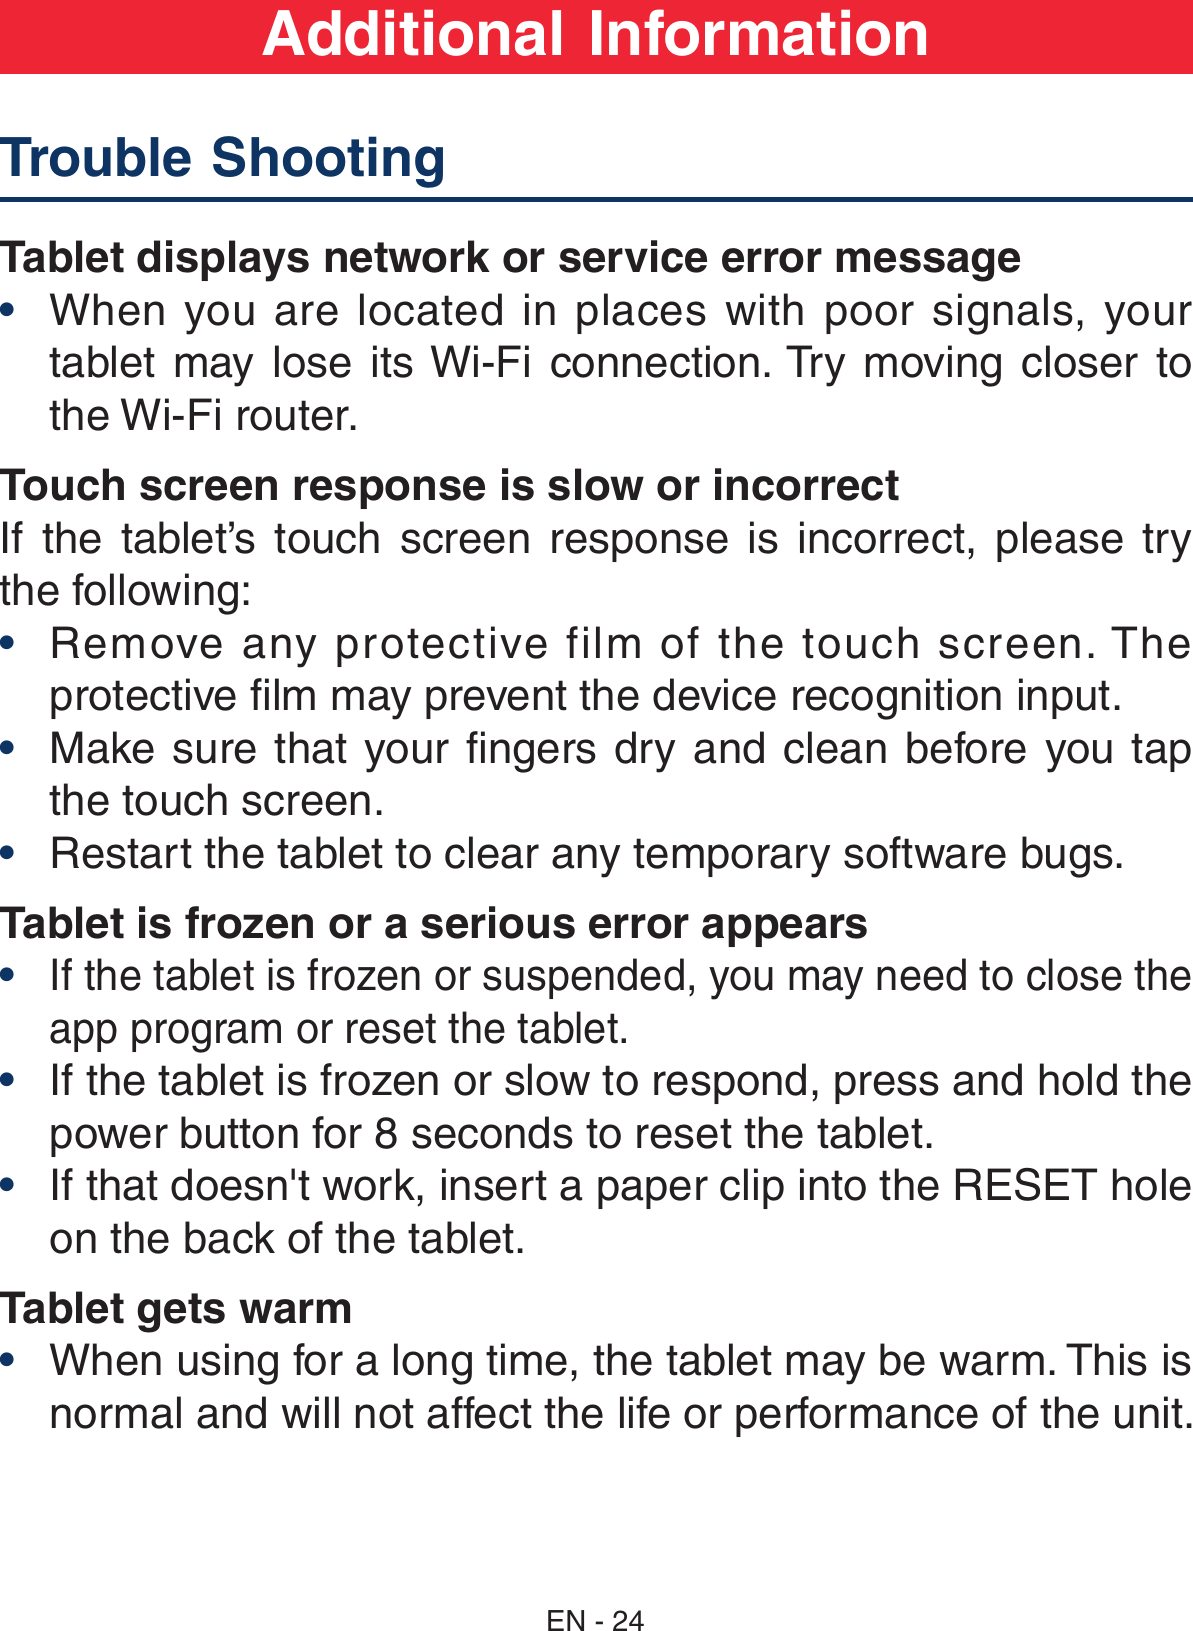 Tablet displays network or service error message•  When  you  are  located in  places  with poor  signals,  your tablet  may  lose  its Wi-Fi  connection. Try  moving  closer to the Wi-Fi router.Touch screen response is slow or incorrectIf  the  tablet’s  touch  screen  response  is  incorrect,  please  try the following:•  Remove any protective film of the touch screen. The protective film may prevent the device recognition input.•  Make sure that your  fingers dry and clean  before  you  tap the touch screen.•  Restart the tablet to clear any temporary software bugs.Tablet is frozen or a serious error appears• If the tablet is frozen or suspended, you may need to close the app program or reset the tablet.•  If the tablet is frozen or slow to respond, press and hold the power button for 8 seconds to reset the tablet.•  If that doesn&apos;t work, insert a paper clip into the RESET hole on the back of the tablet.Tablet gets warm•  When using for a long time, the tablet may be warm. This is normal and will not affect the life or performance of the unit.Trouble Shooting     Additional InformationEN - 24